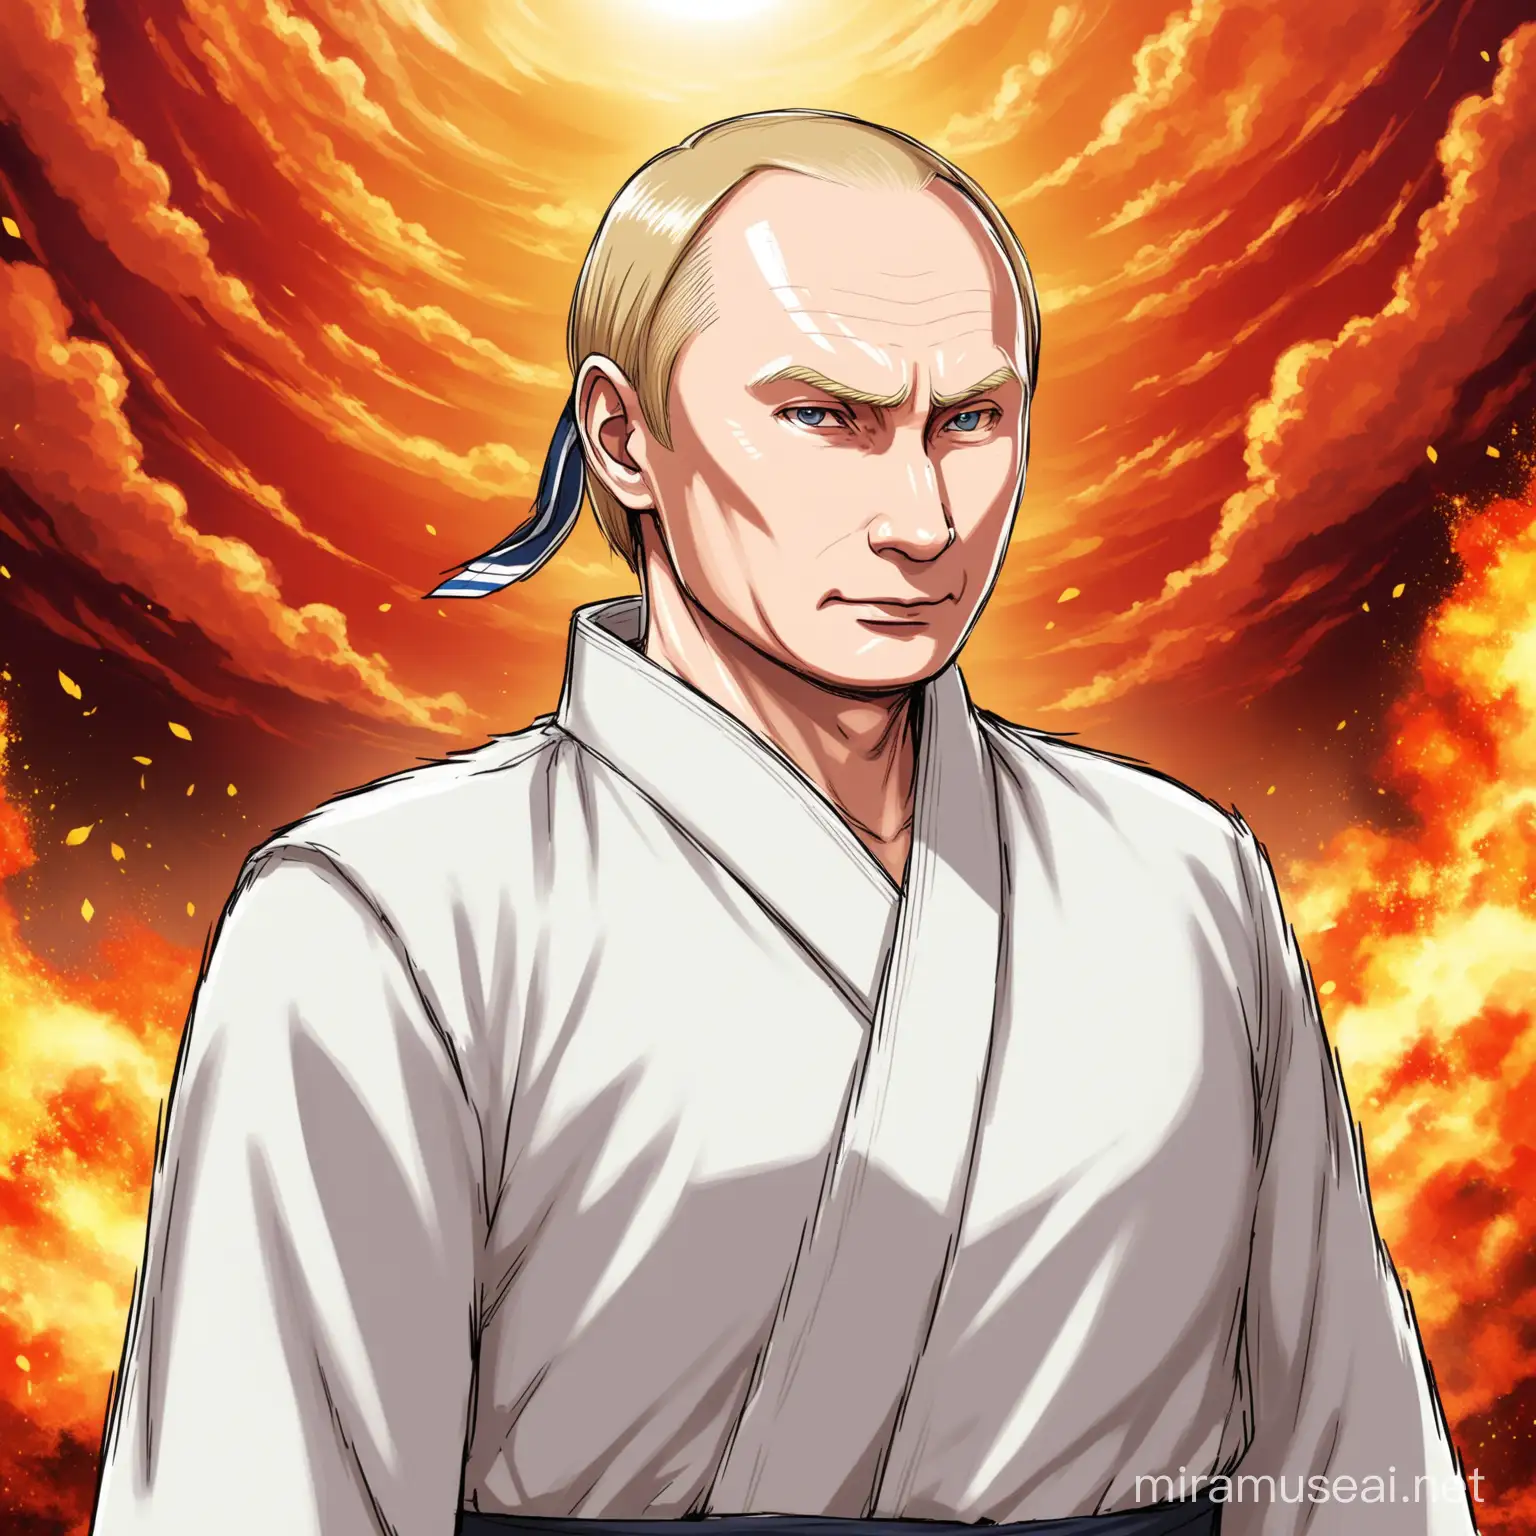 make a president Putin as a Naruto charachter and add to great atmosphere